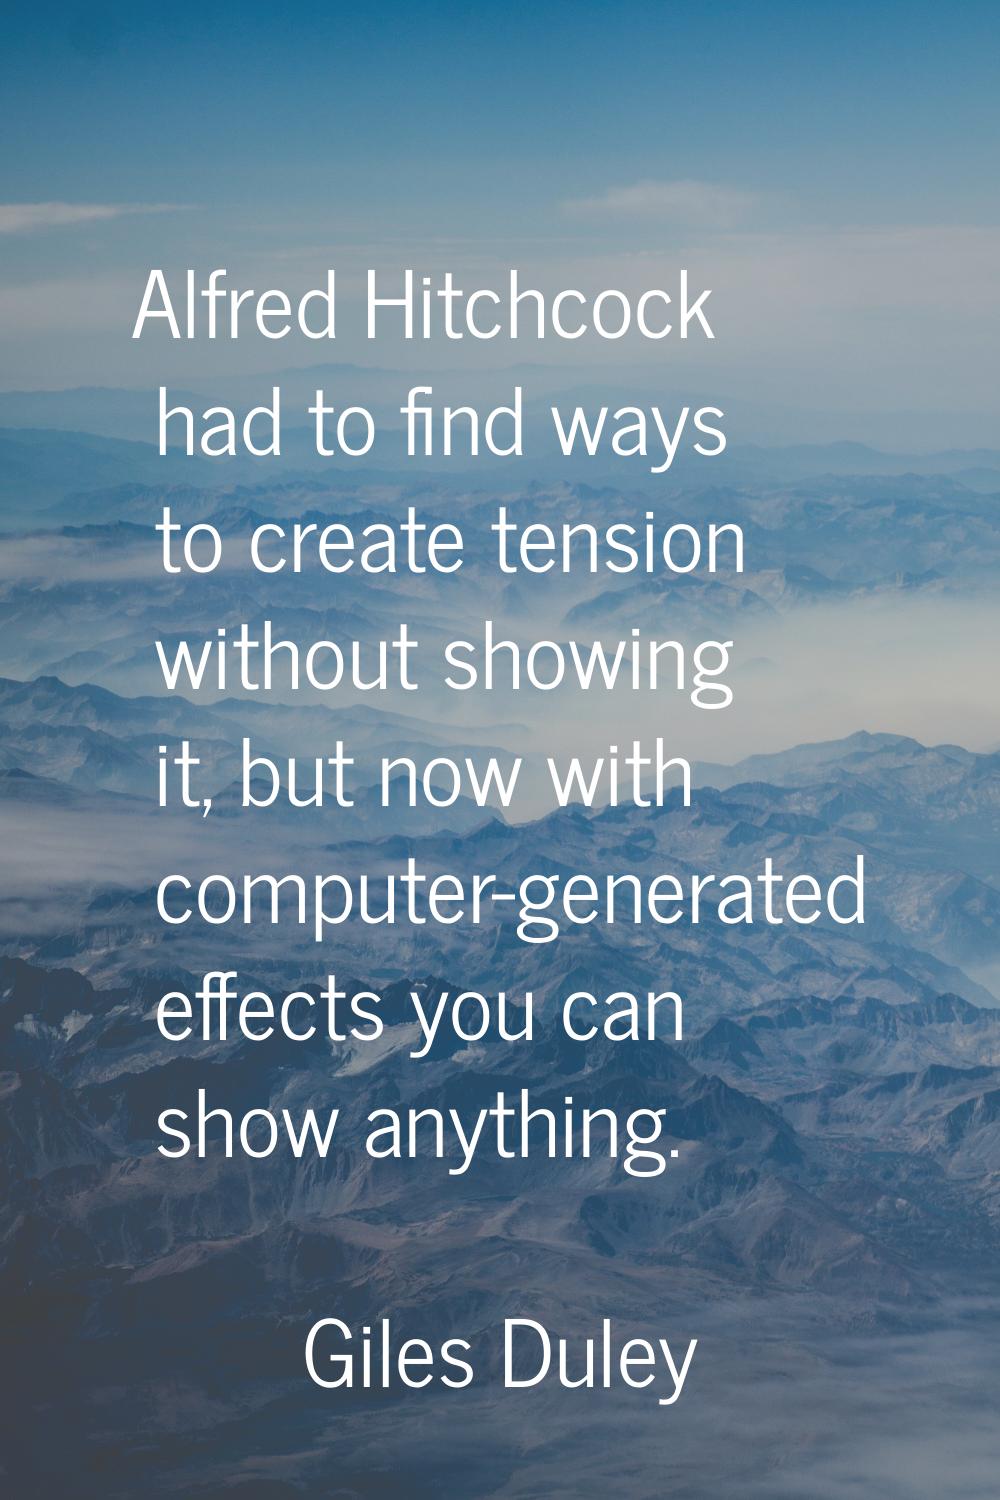 Alfred Hitchcock had to find ways to create tension without showing it, but now with computer-gener